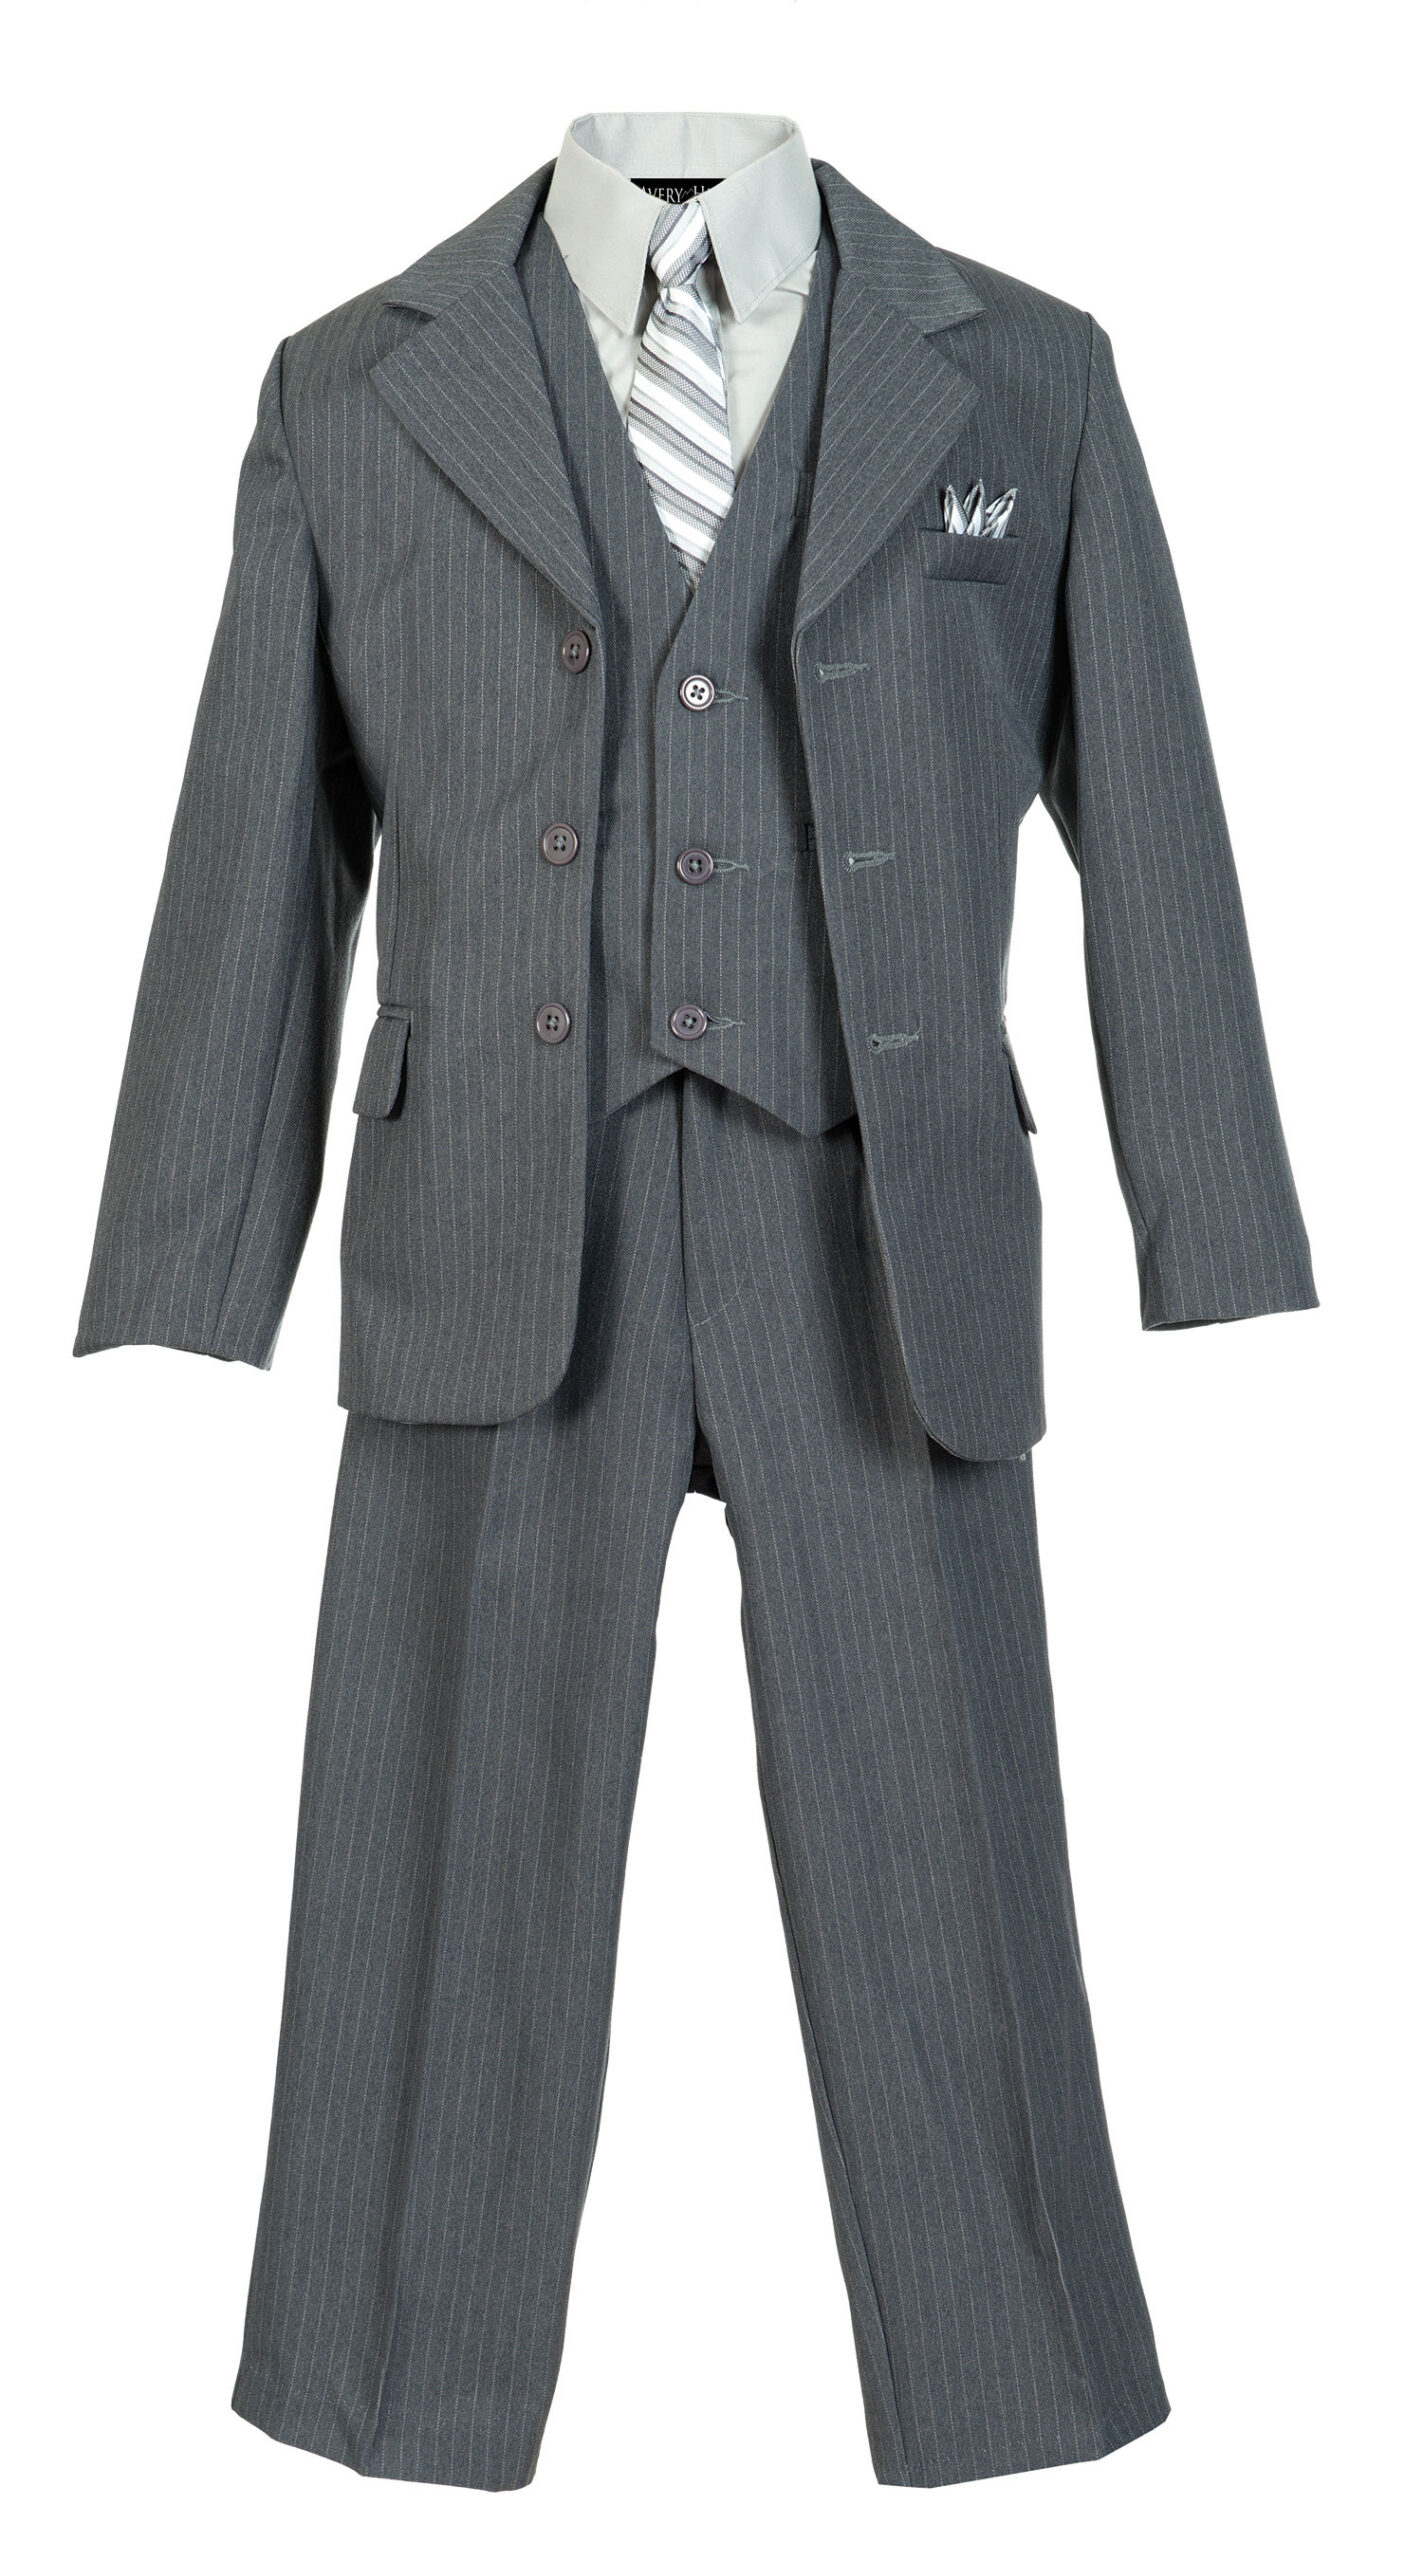 Boys Pinstripe Suit Set with Matching Tie LTGY 16